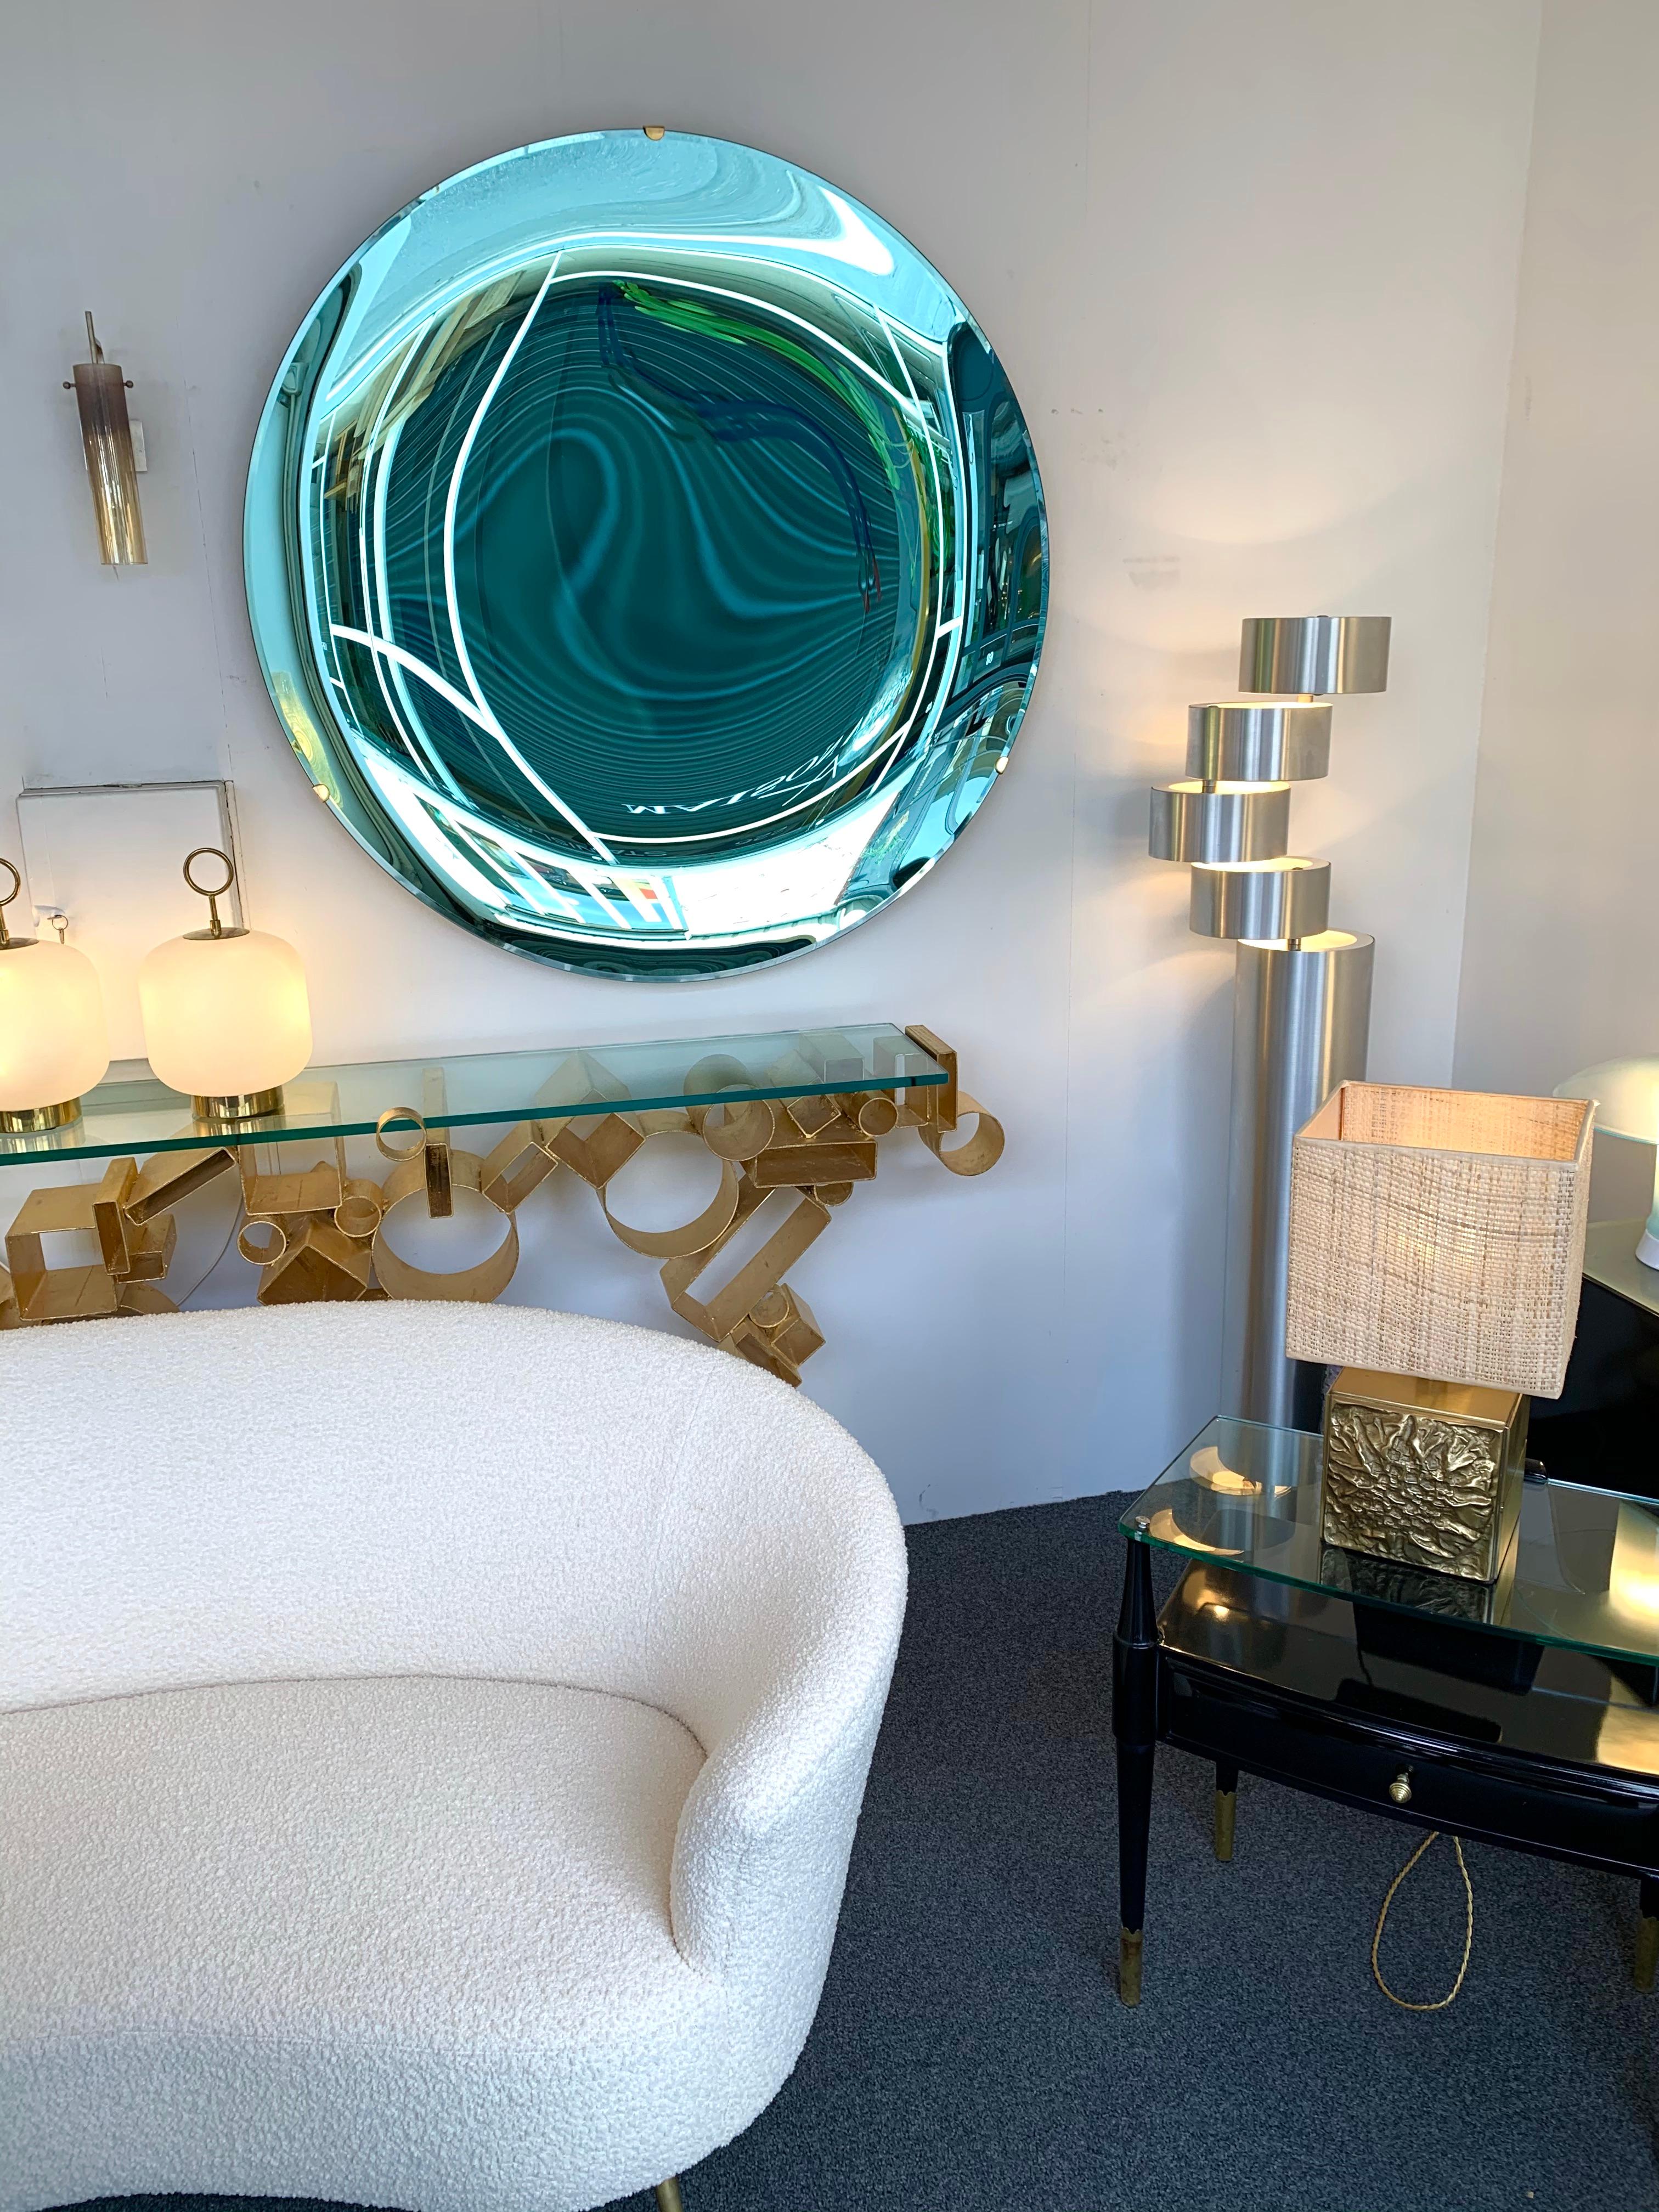 Contemporary curve concave sculpture green wall mirror, brass structure. Artisanal handmade work made by a small italian design workshop using the old style mercurization technic.

standart diameter dimensions indicated in description 43.31